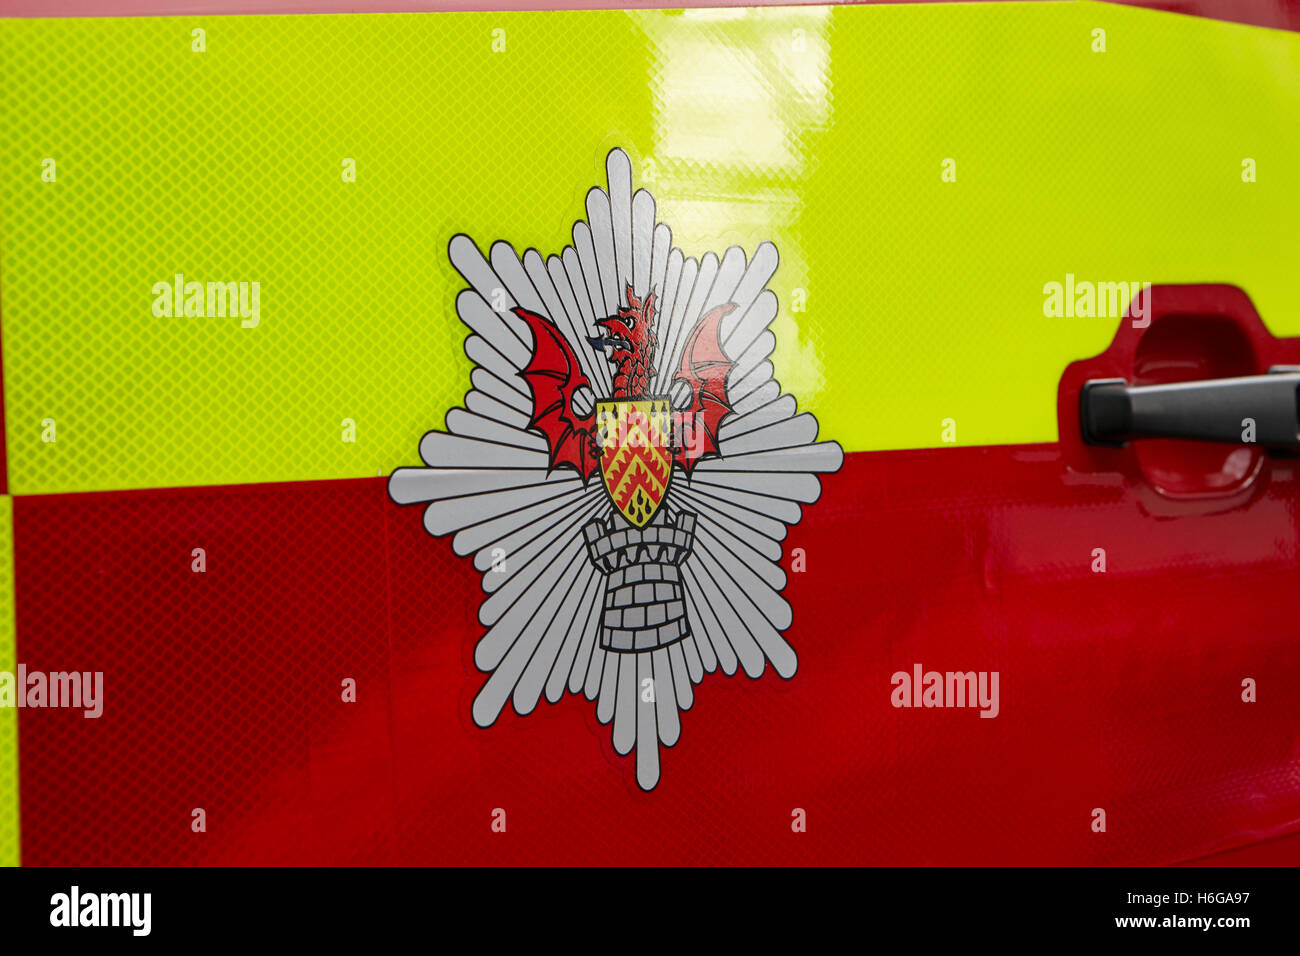 south wales fire service crest logo on fire engine Cardiff Wales United Kingdom Stock Photo